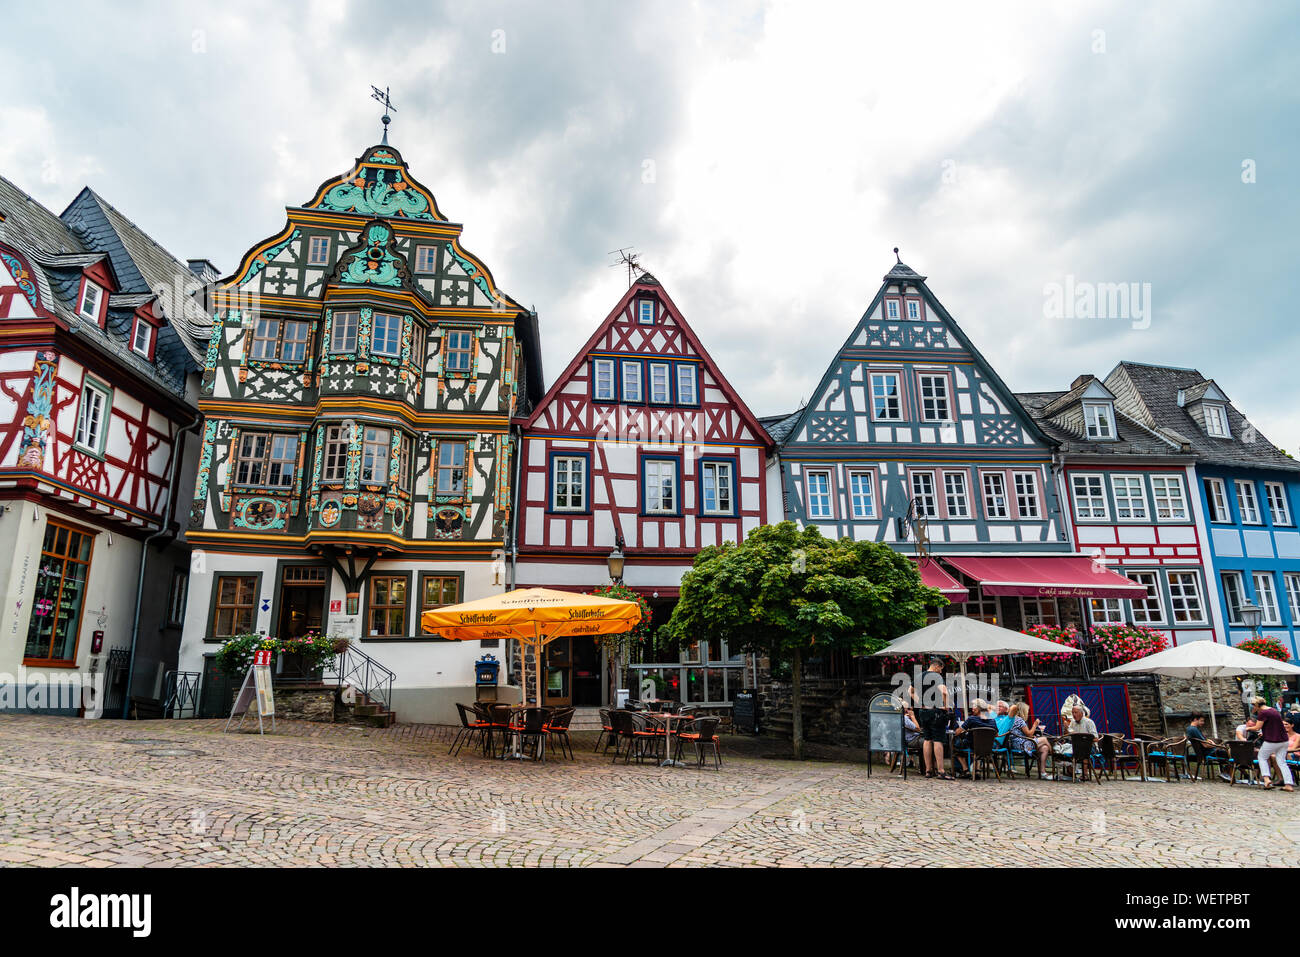 29 August 2019: Colorful Half-timbered (Fachwerkhaus) house, houses, cafe, restaurants, peaple on marketplace in Idstein, Hessen (Hesse), Germany. Nea Stock Photo